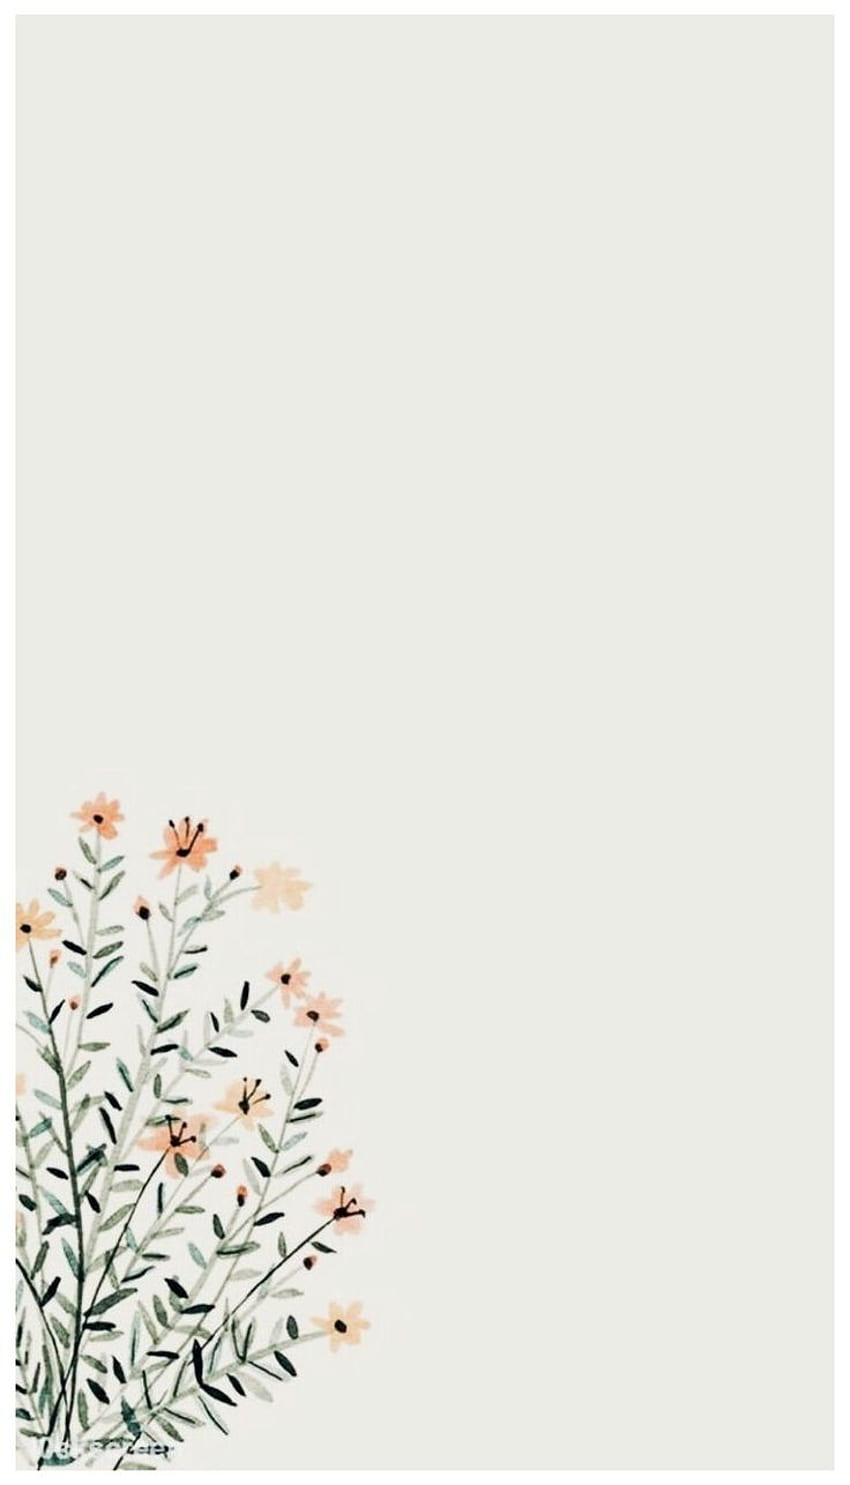 Download Charming Flower Simple Iphone Wallpaper | Wallpapers.com